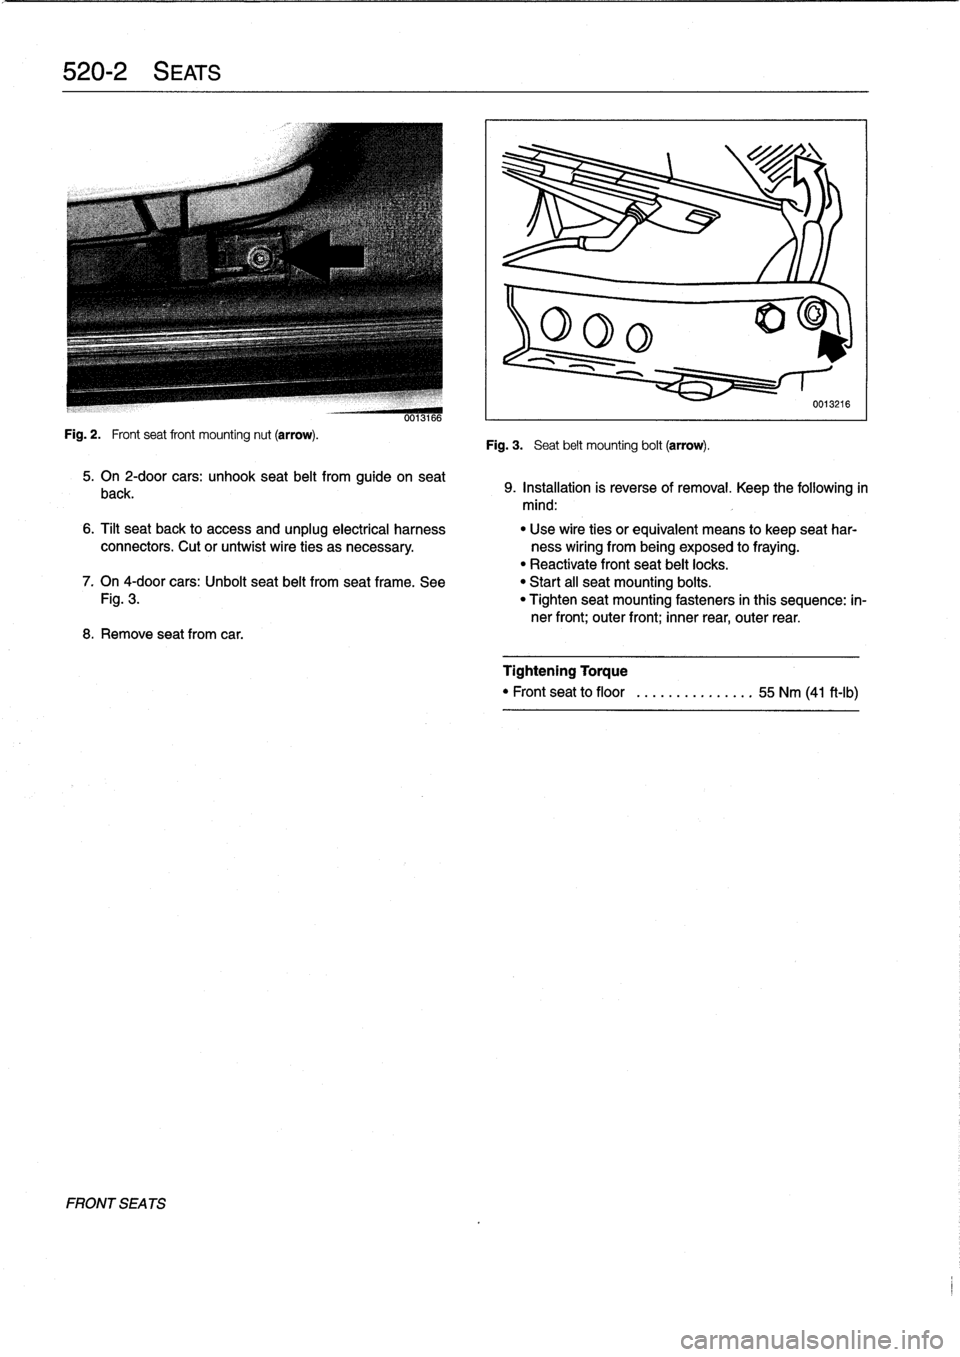 BMW 318i 1998 E36 Service Manual 520-2

	

S
EATS

Fig
.
2
.

	

Frontseat
front
mounting
nut
(arrow)
.

FRONT
SEA
TS

0013166

5
.
On
2-door
cars
:
unhook
seat
belt
from
guide
on
seat

back
.

8
.
Remove
seatfrom
car
.

Fig
.
3
.

	